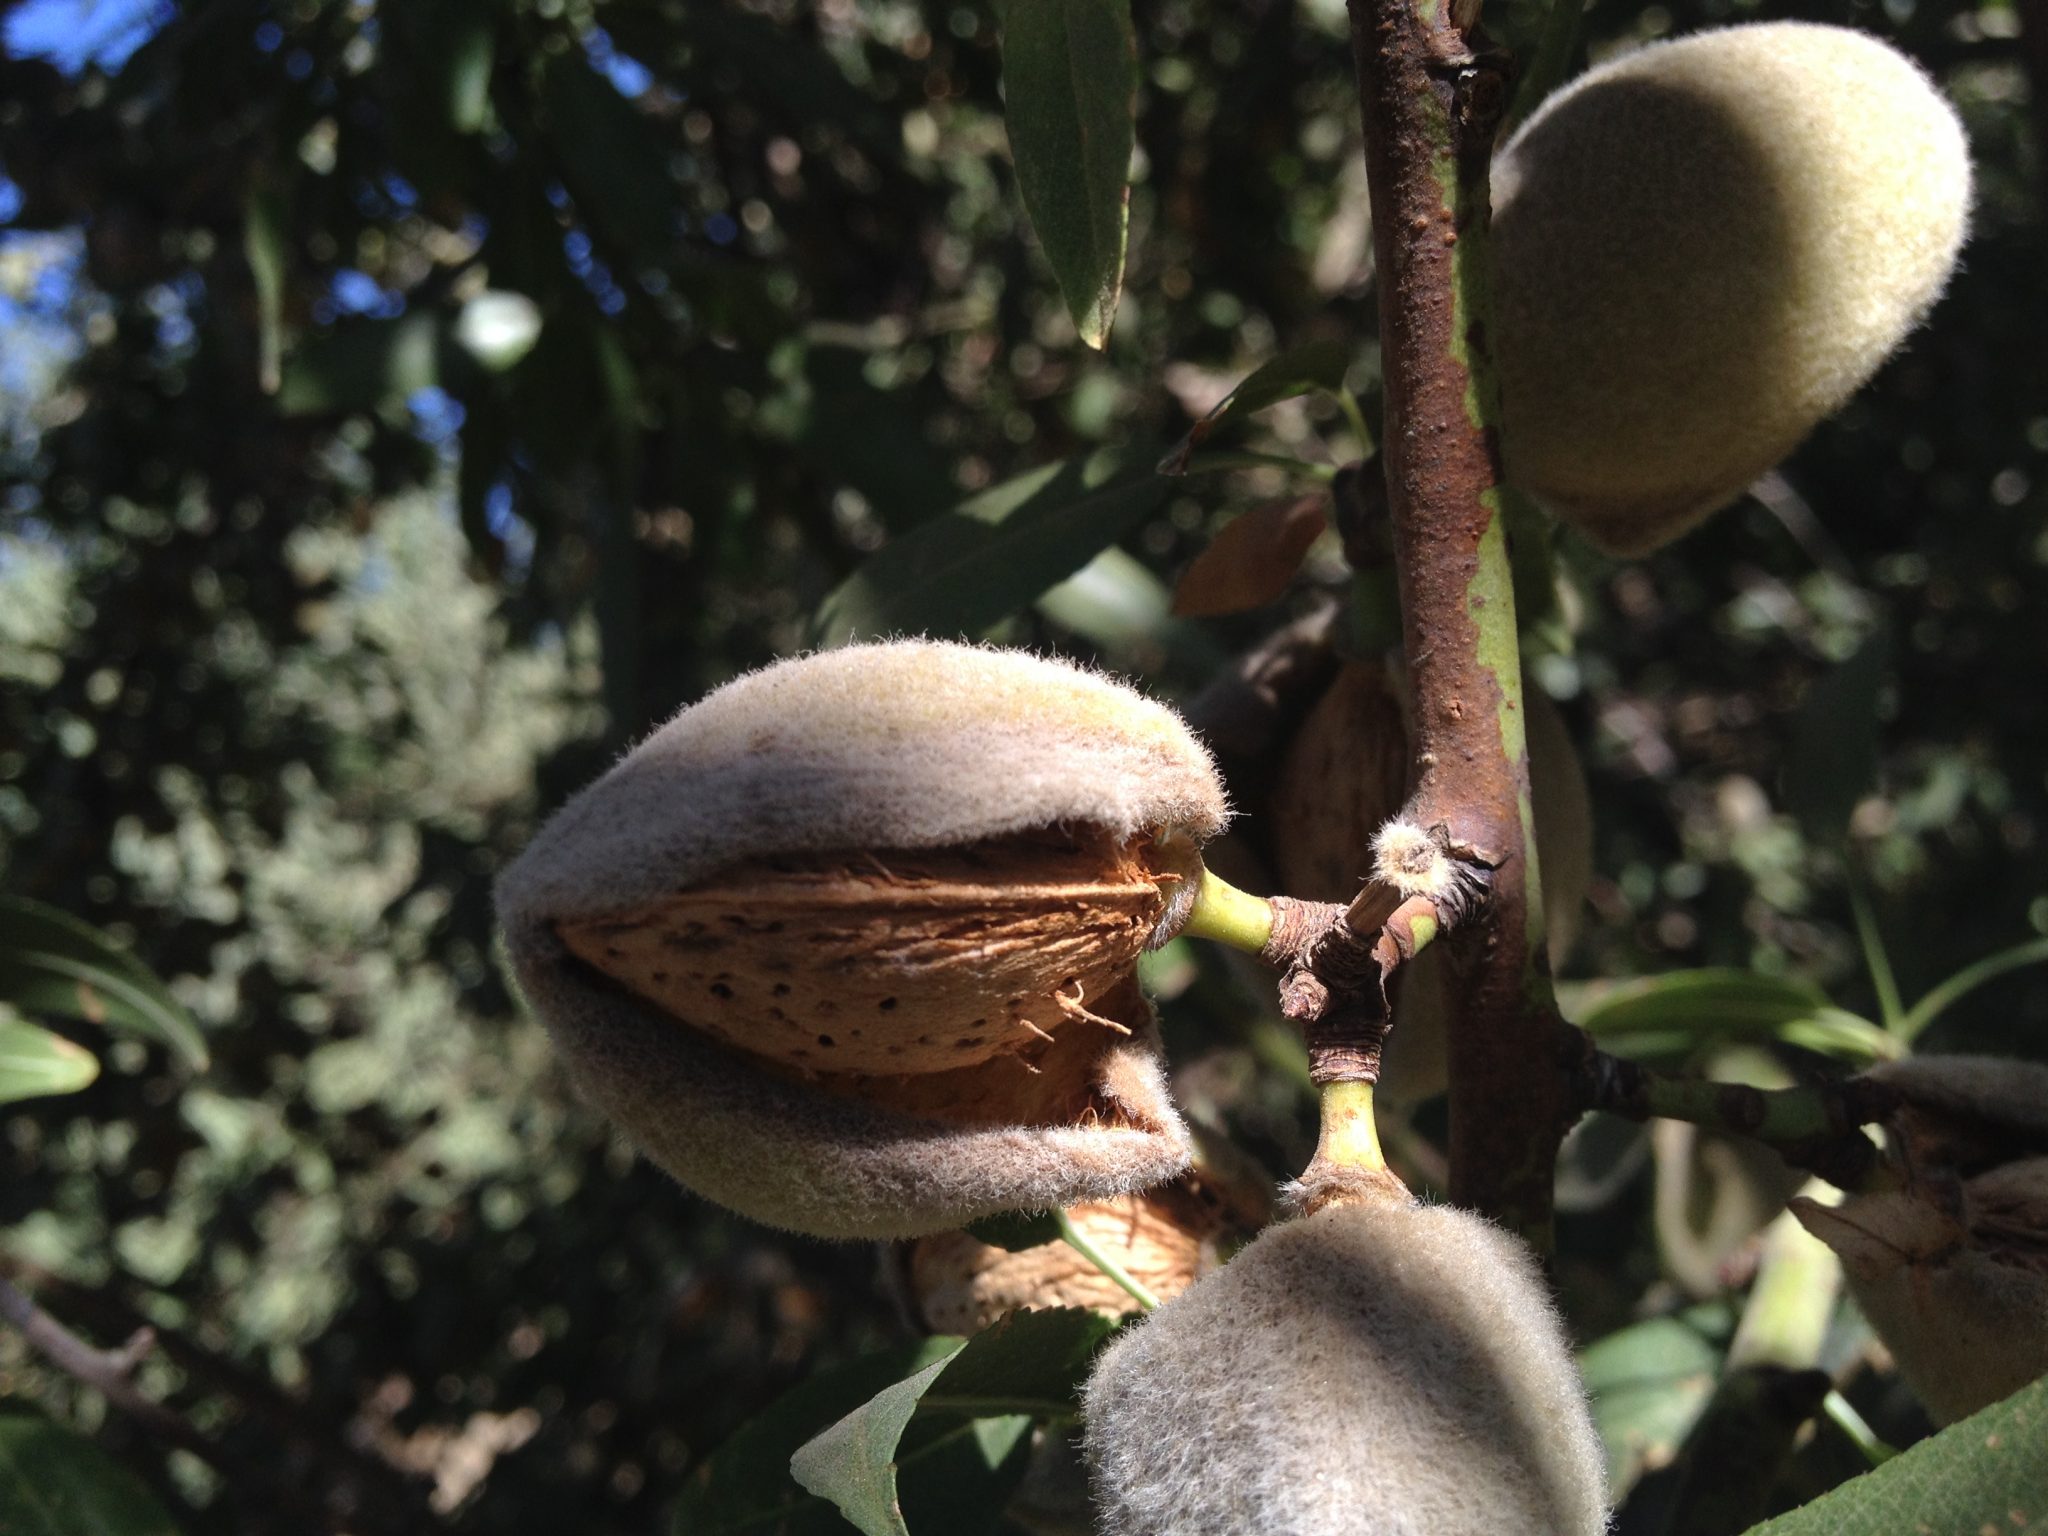 Who knew this is how almonds grow?